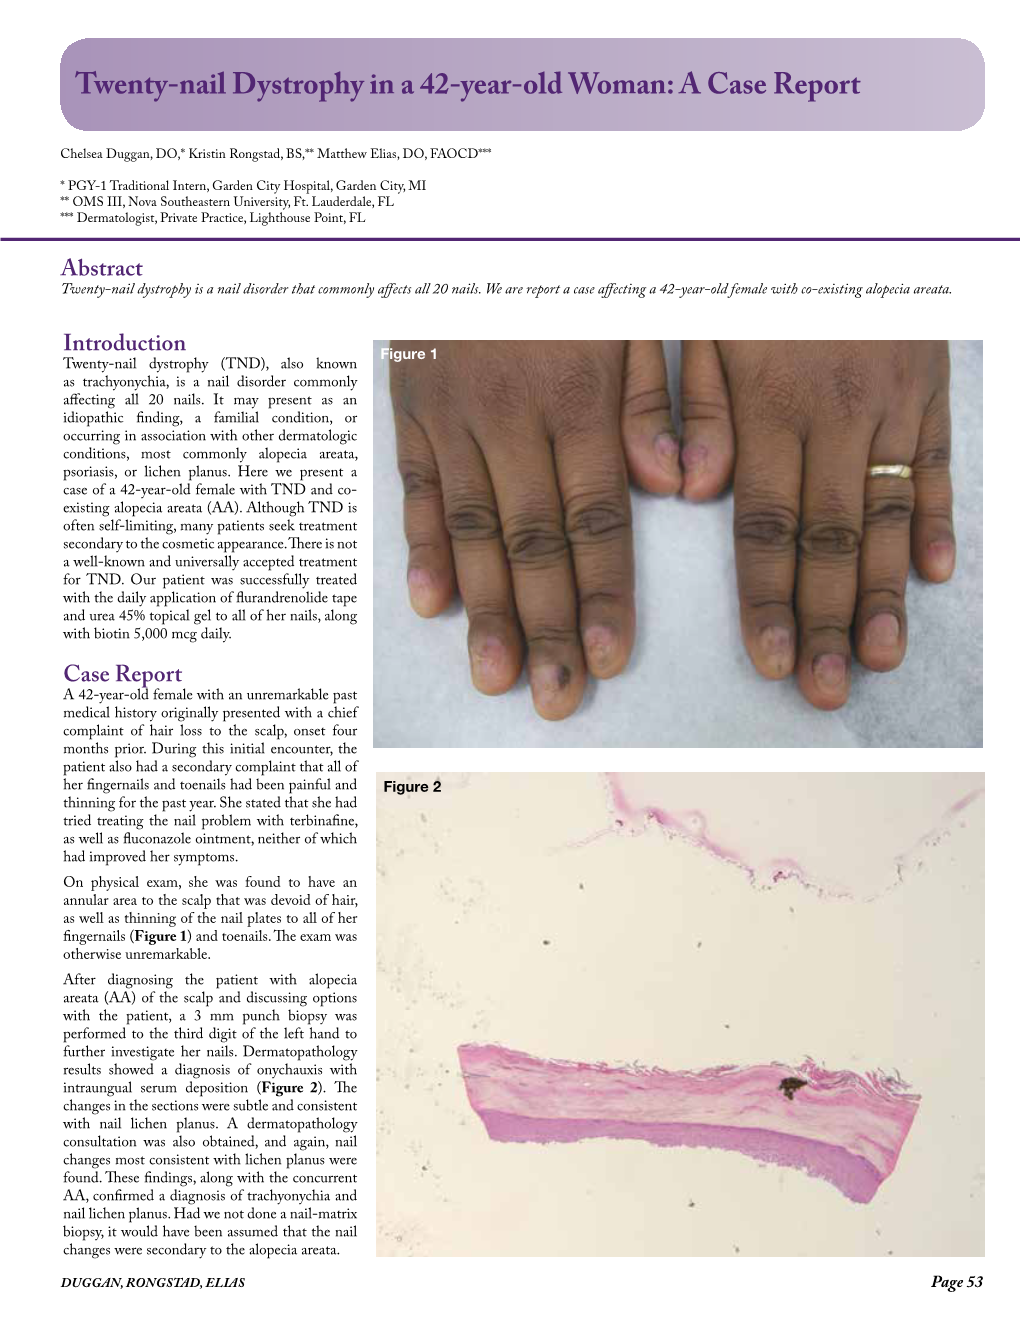 Twenty-Nail Dystrophy in a 42-Year-Old Woman: a Case Report